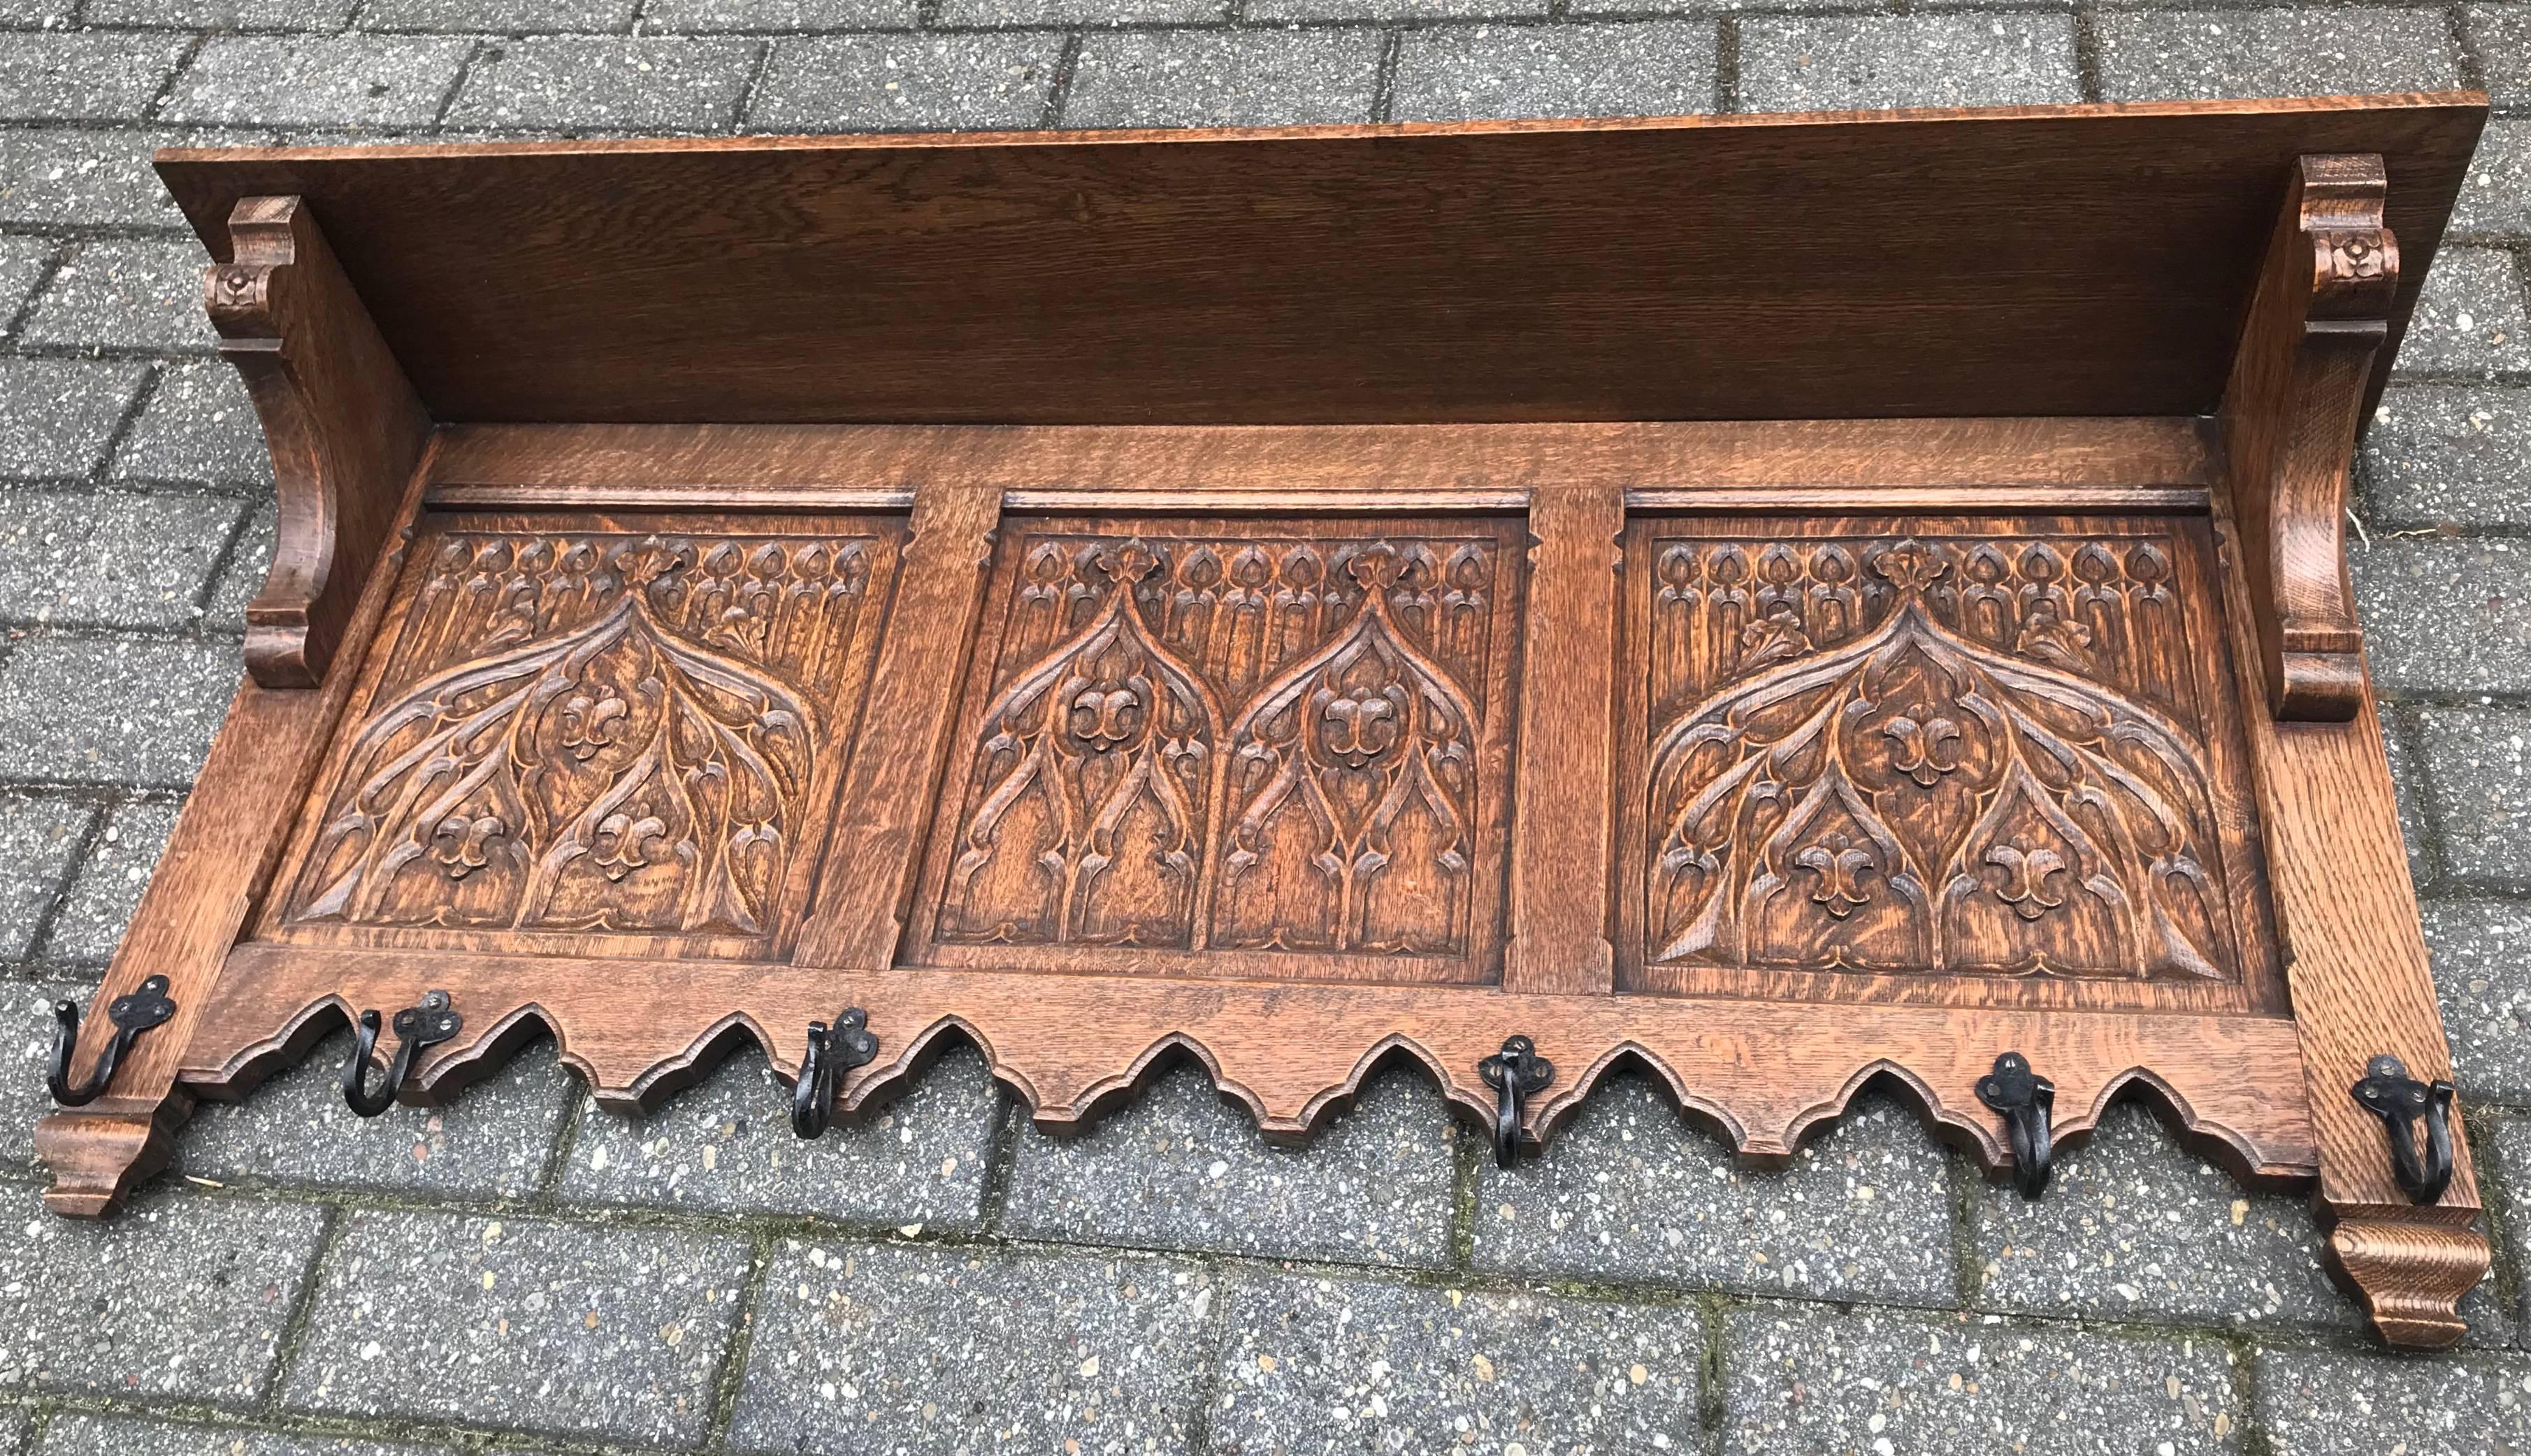 Wonderful craftsmanship solid oak Gothic Revival wall coat-rack.

Anyone who has ever visited a Gothic (Revival) church or other Gothic style building will immediately recognize the same stunning elements in this all handcrafted coat rack. The